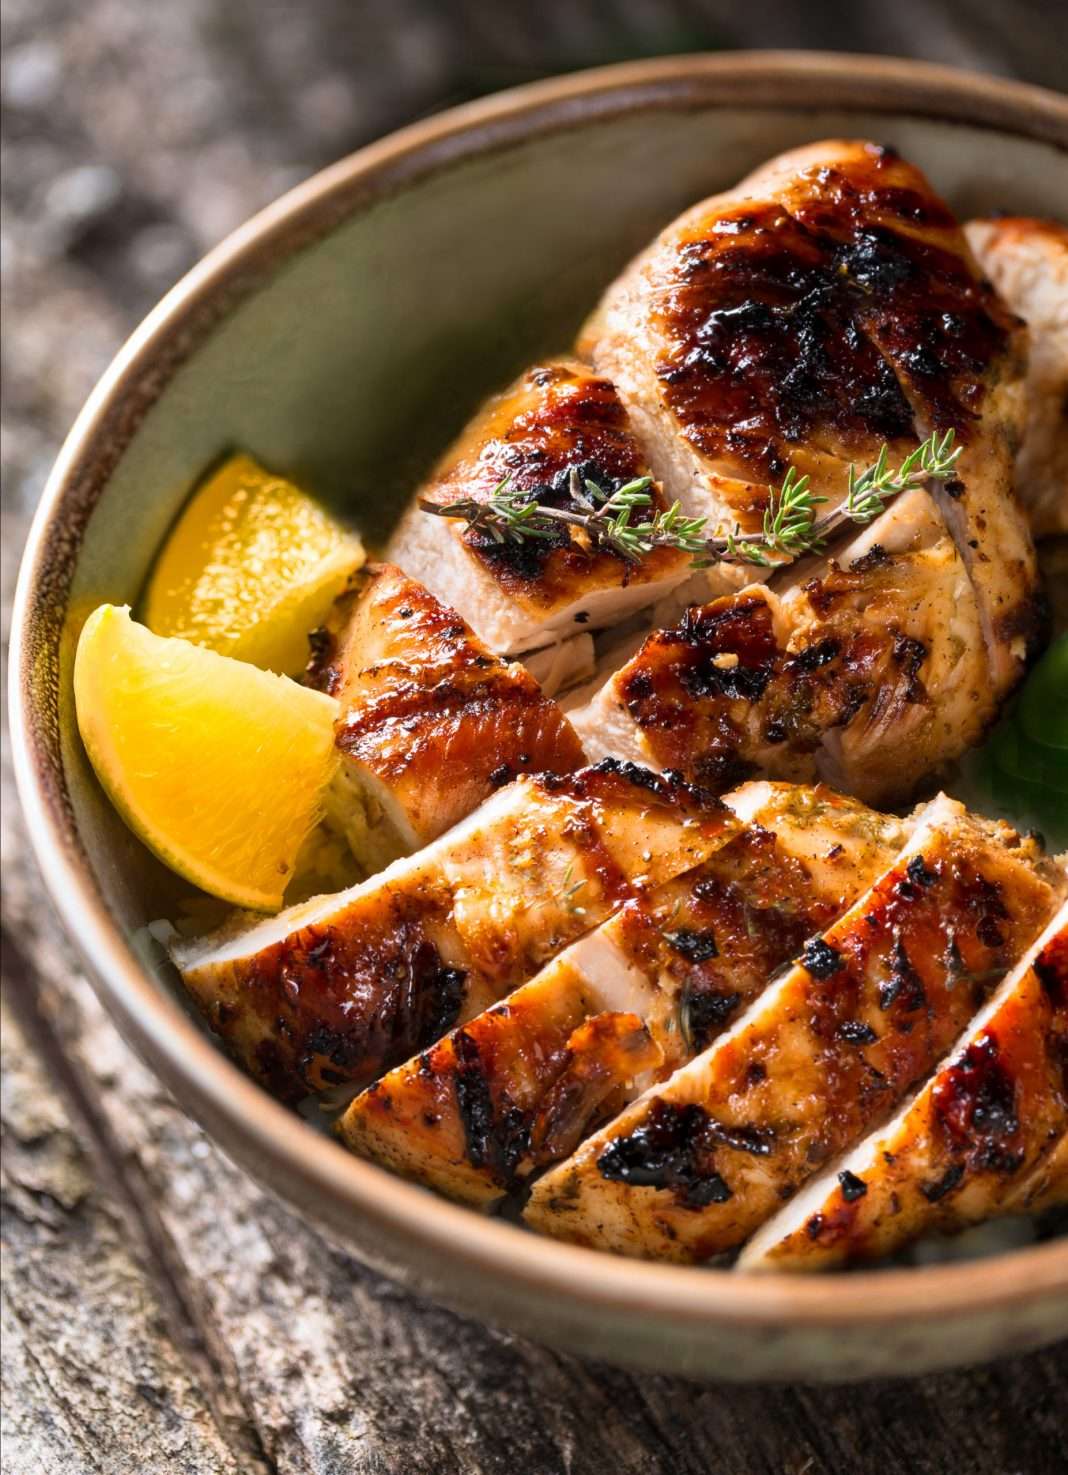 Grilled chicken breast: Yummy and healthy in your tummy!